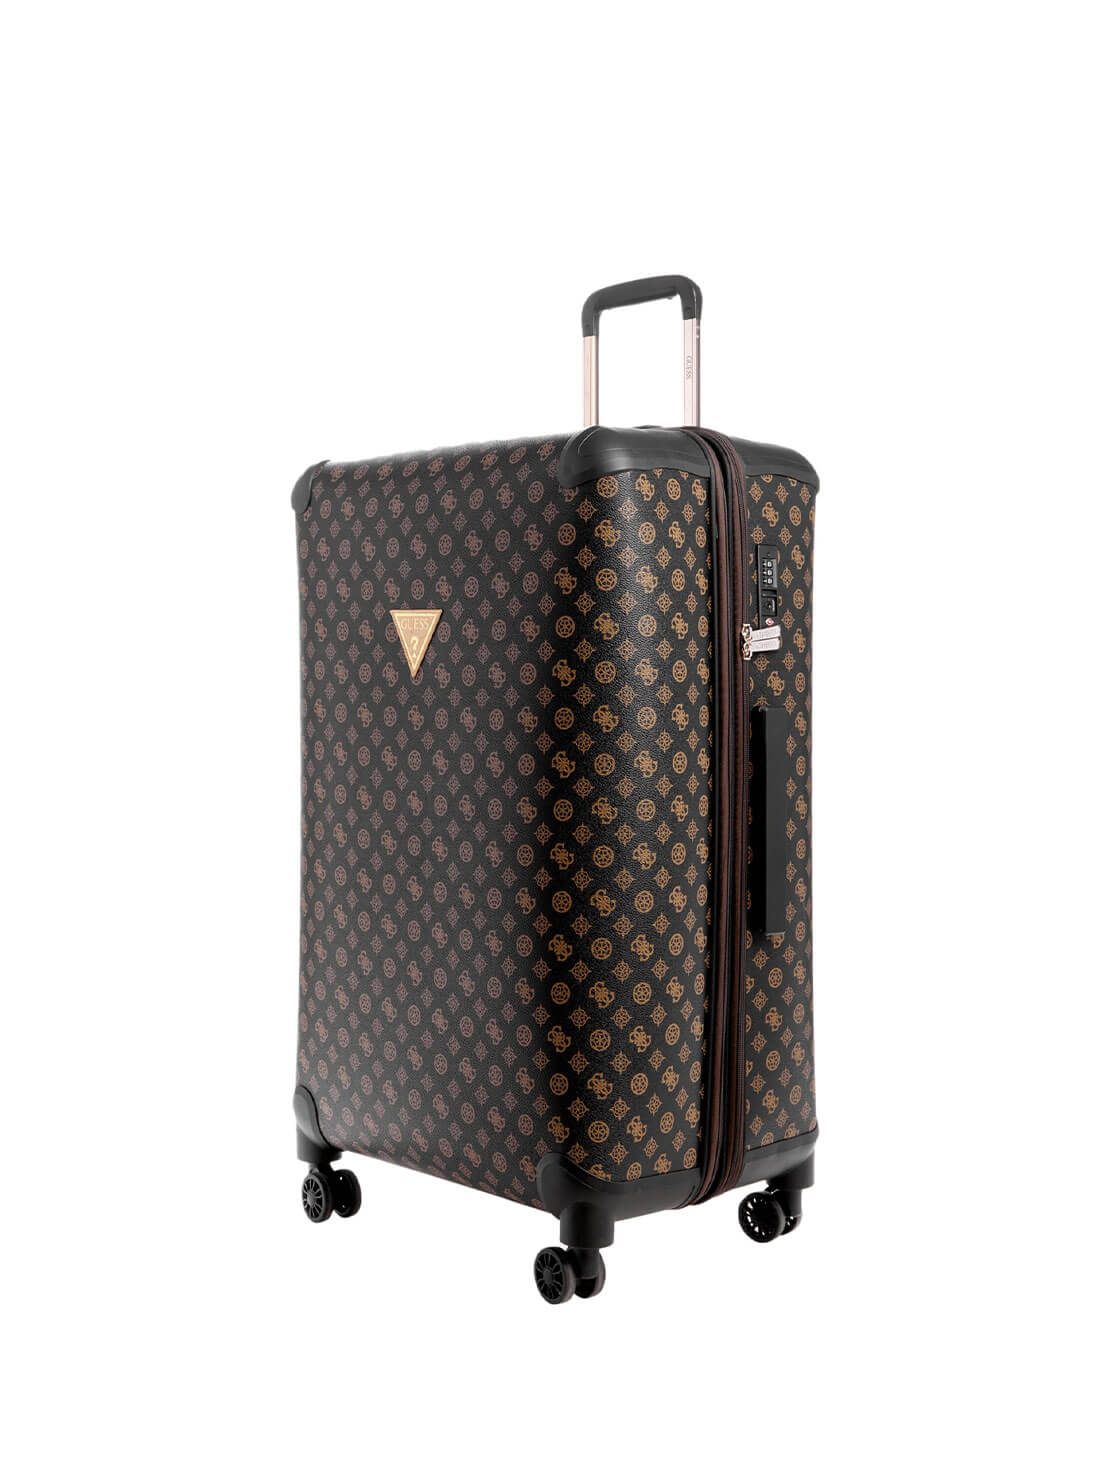 GUESS Black Wilder 71cm Suitcase side view